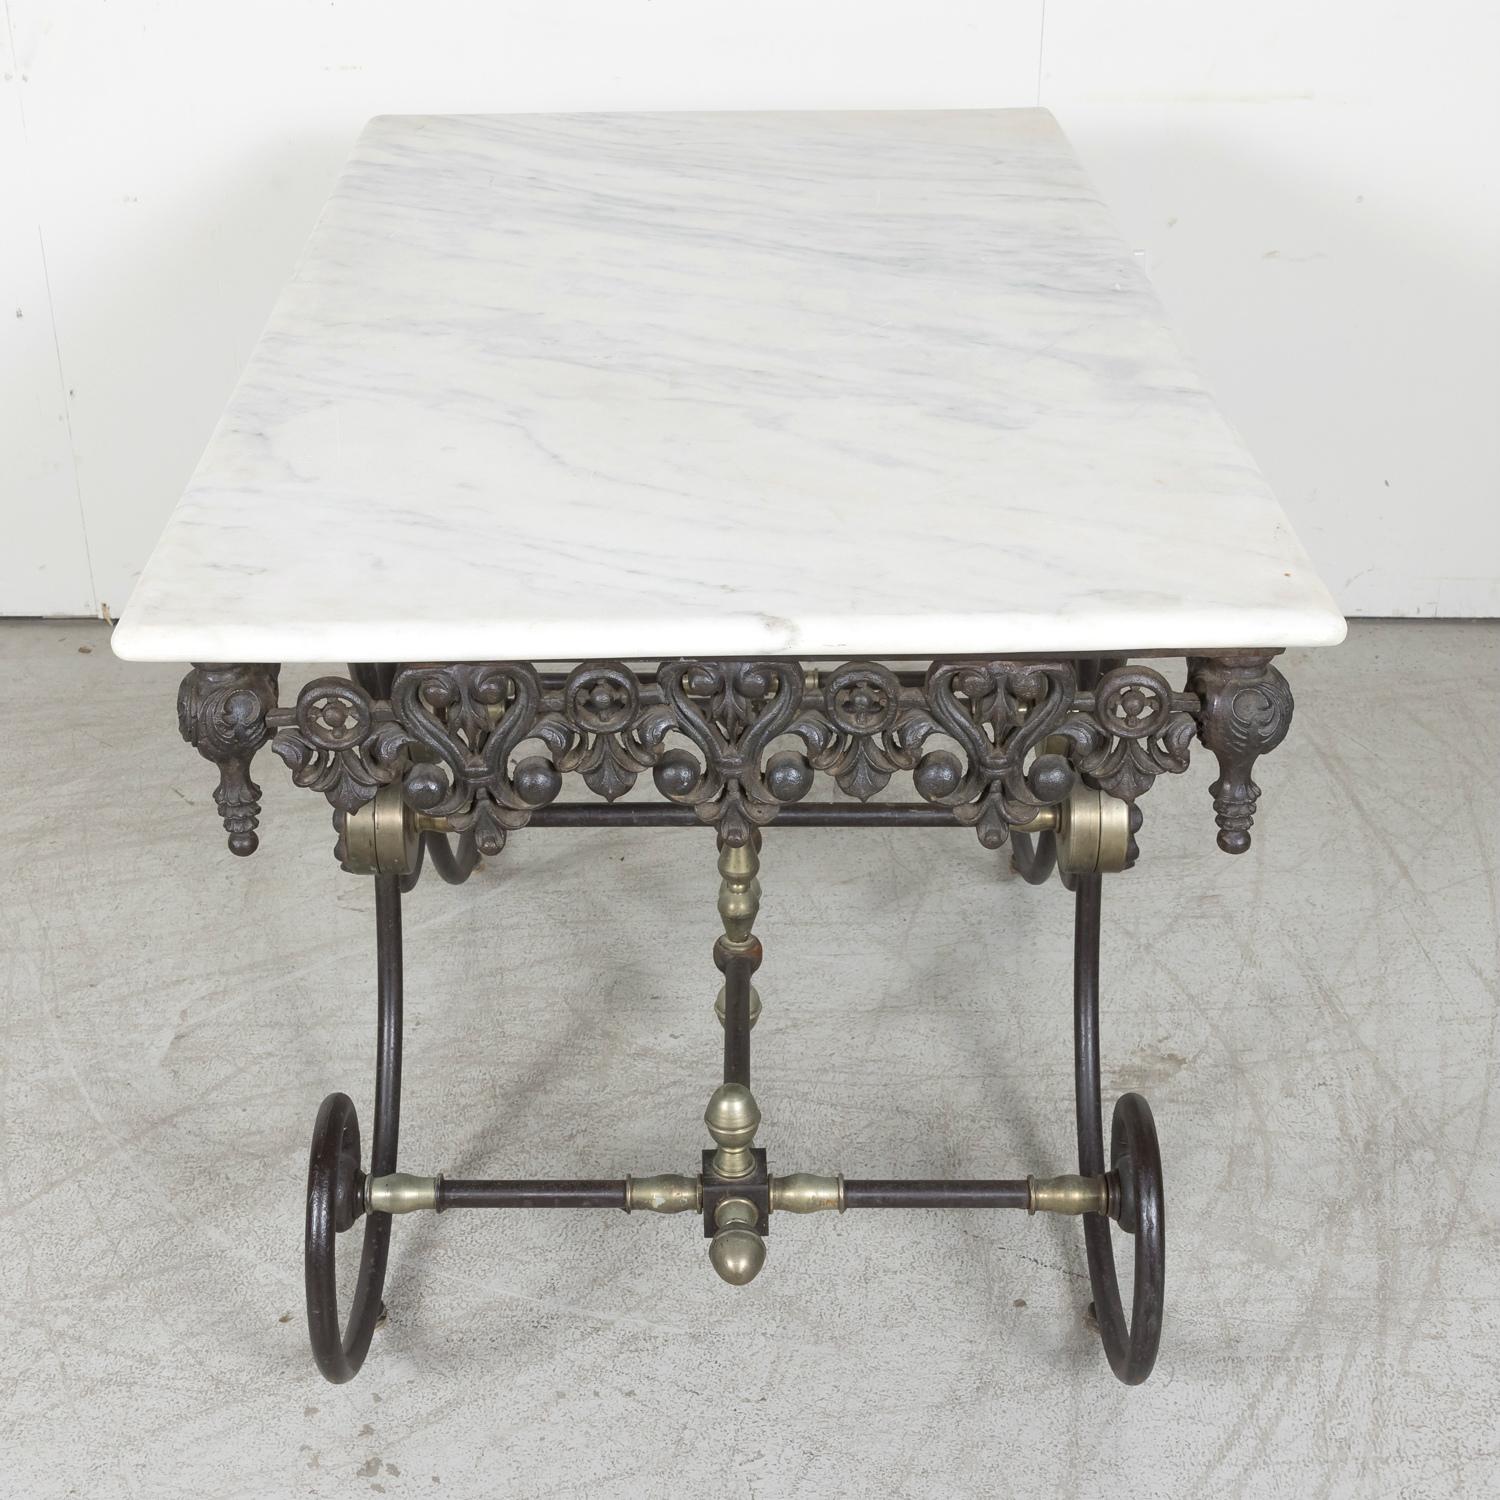 Vintage French Iron and Marble Patisserie or Pastry Table 11